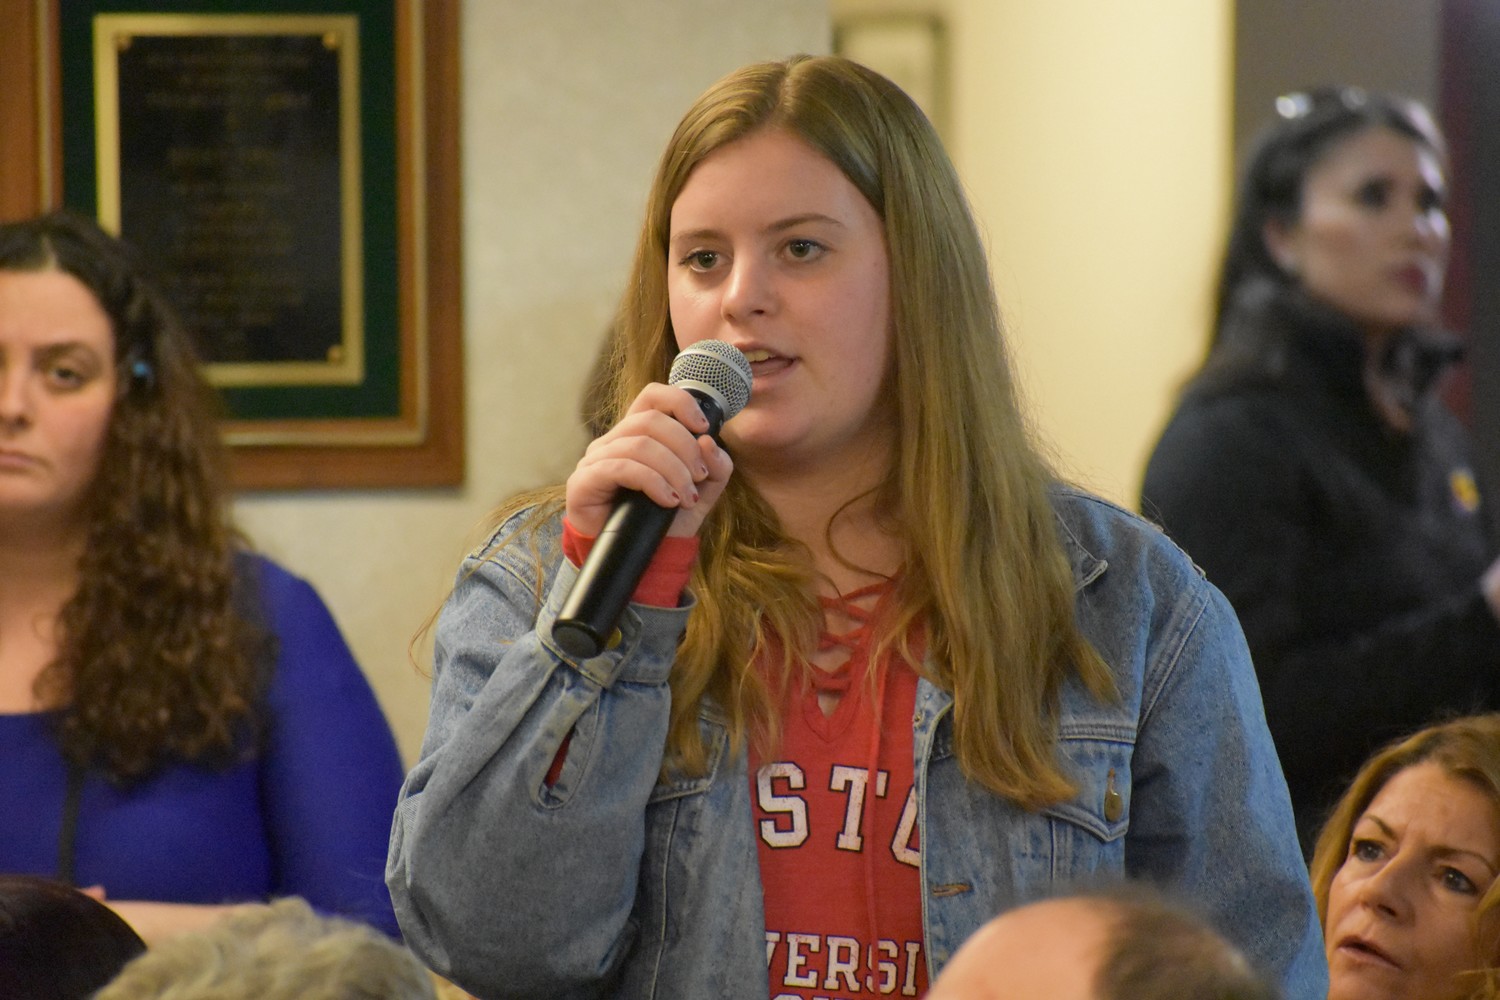 Julia Baxley, a senior at South Side High School, urged adults and teenagers to share their perspectives on school safety.